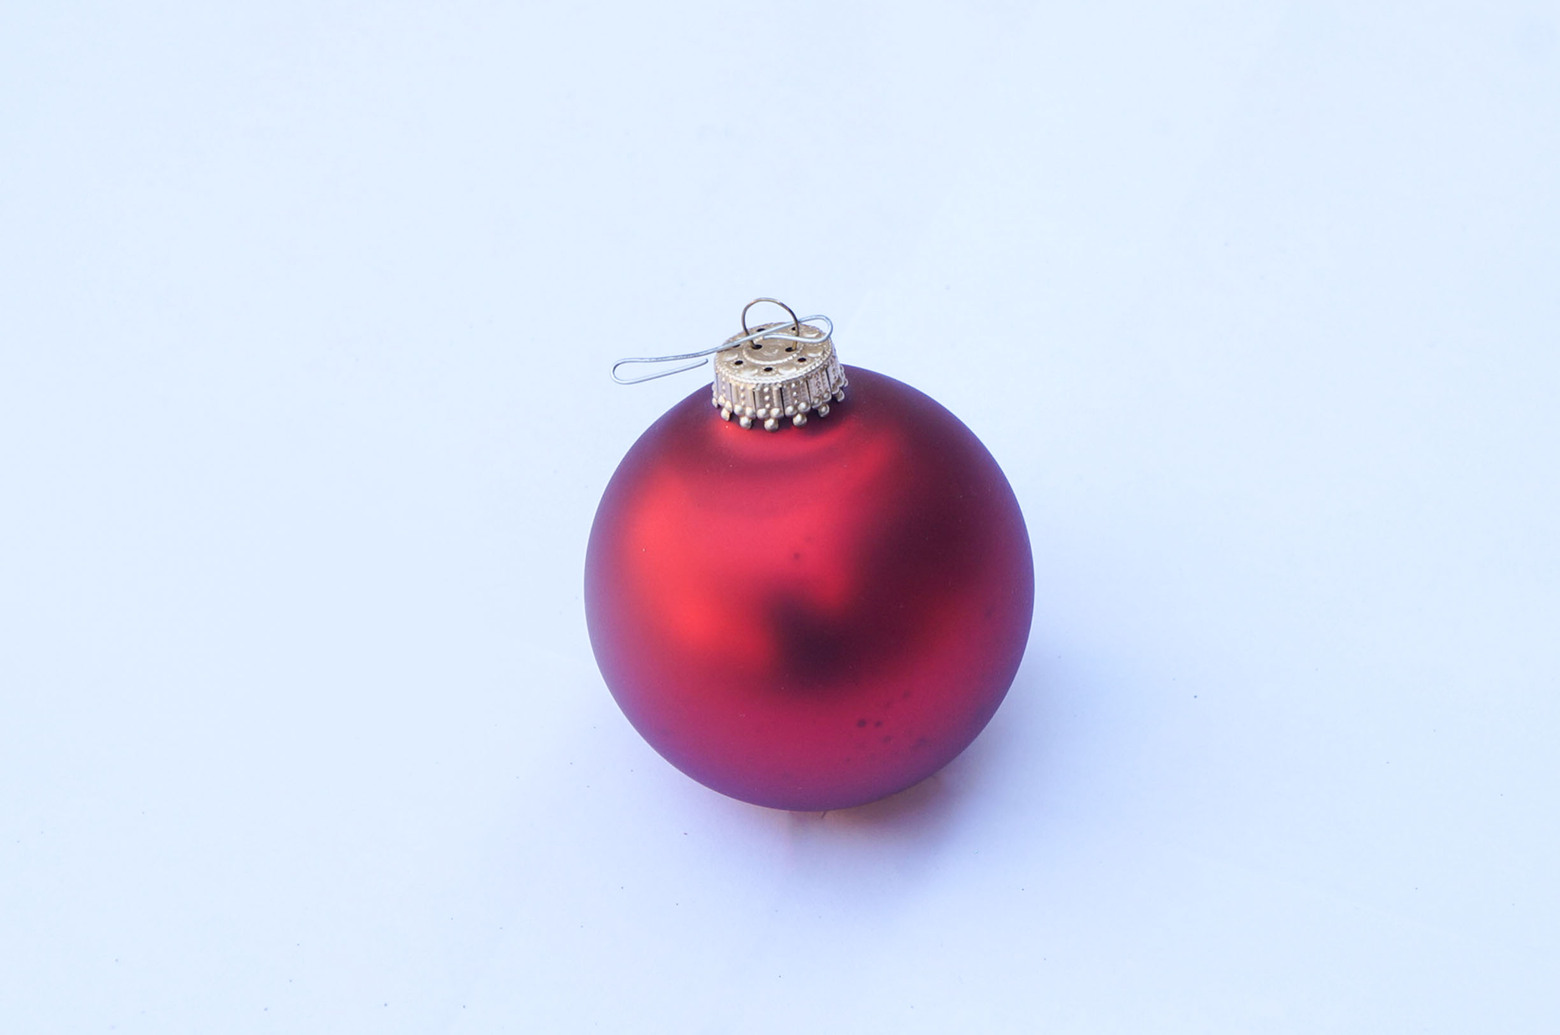 Vintage Blown Glass Christmas Ball Ornament/ヴィンテージ クリスマス オーナメント 吹きガラス ボール レトロ 7個セット 11